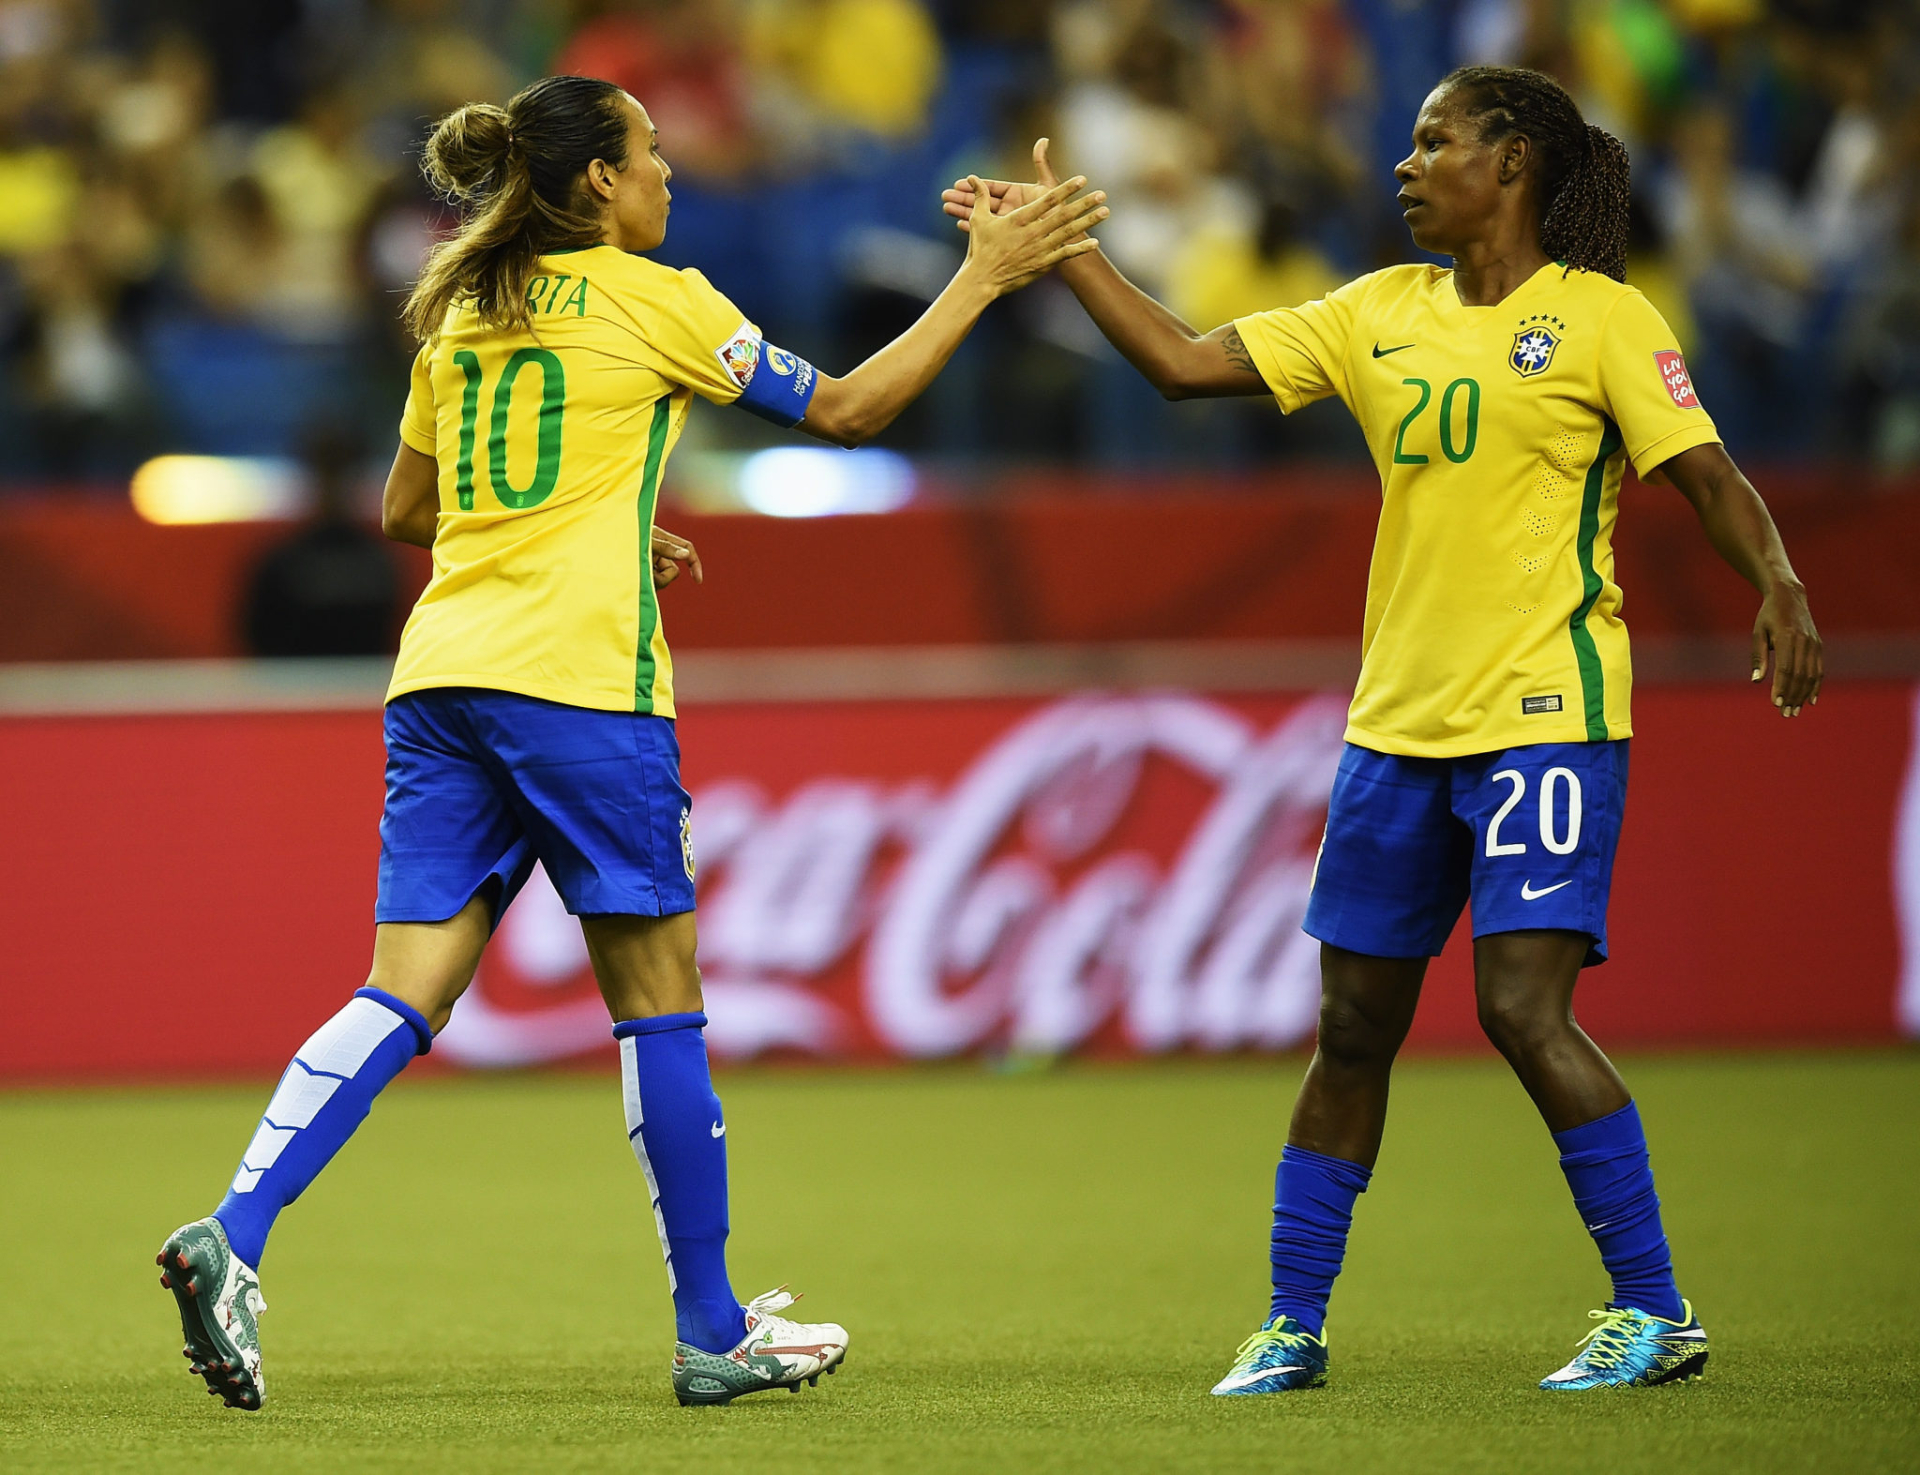 MONTREAL, QC - JUNE 09:  Marta of Brazil celebrates scoring her penalty goal with Formiga during the FIFA Women's World Cup 2015  group E match between Brazil and Korea Republic at Olympic Stadium on June 9, 2015 in Montreal, Canada  (Photo by Stuart Franklin - FIFA/FIFA via Getty Images)